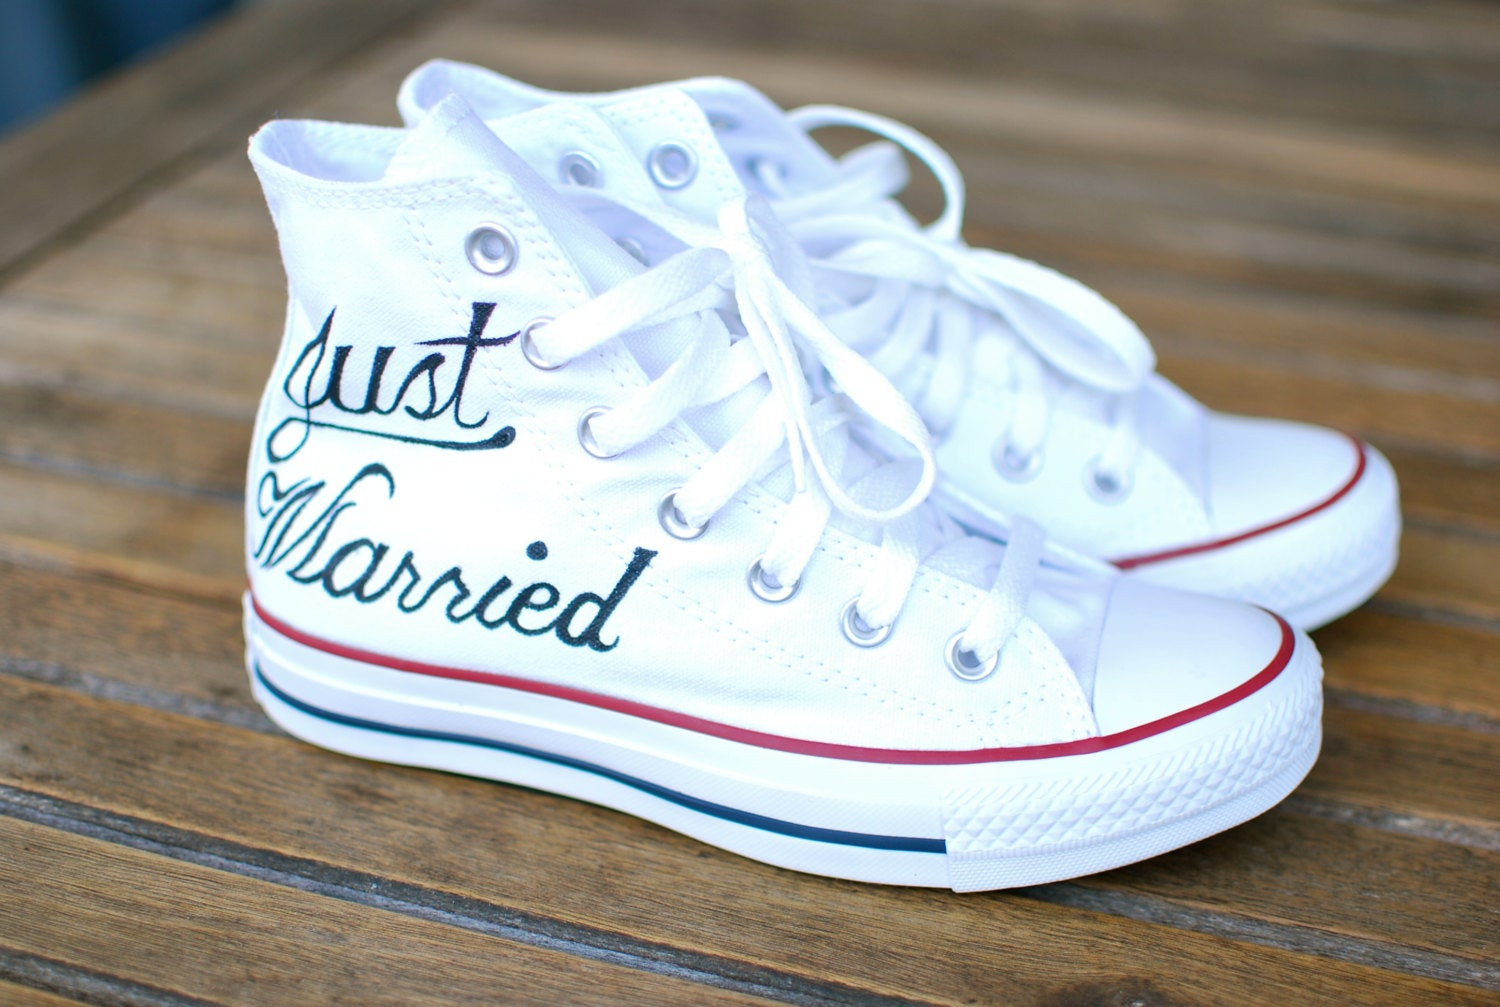 Wedding Converse Shoes
 Custom Hand Painted Just Married Converse Sneakers Optical